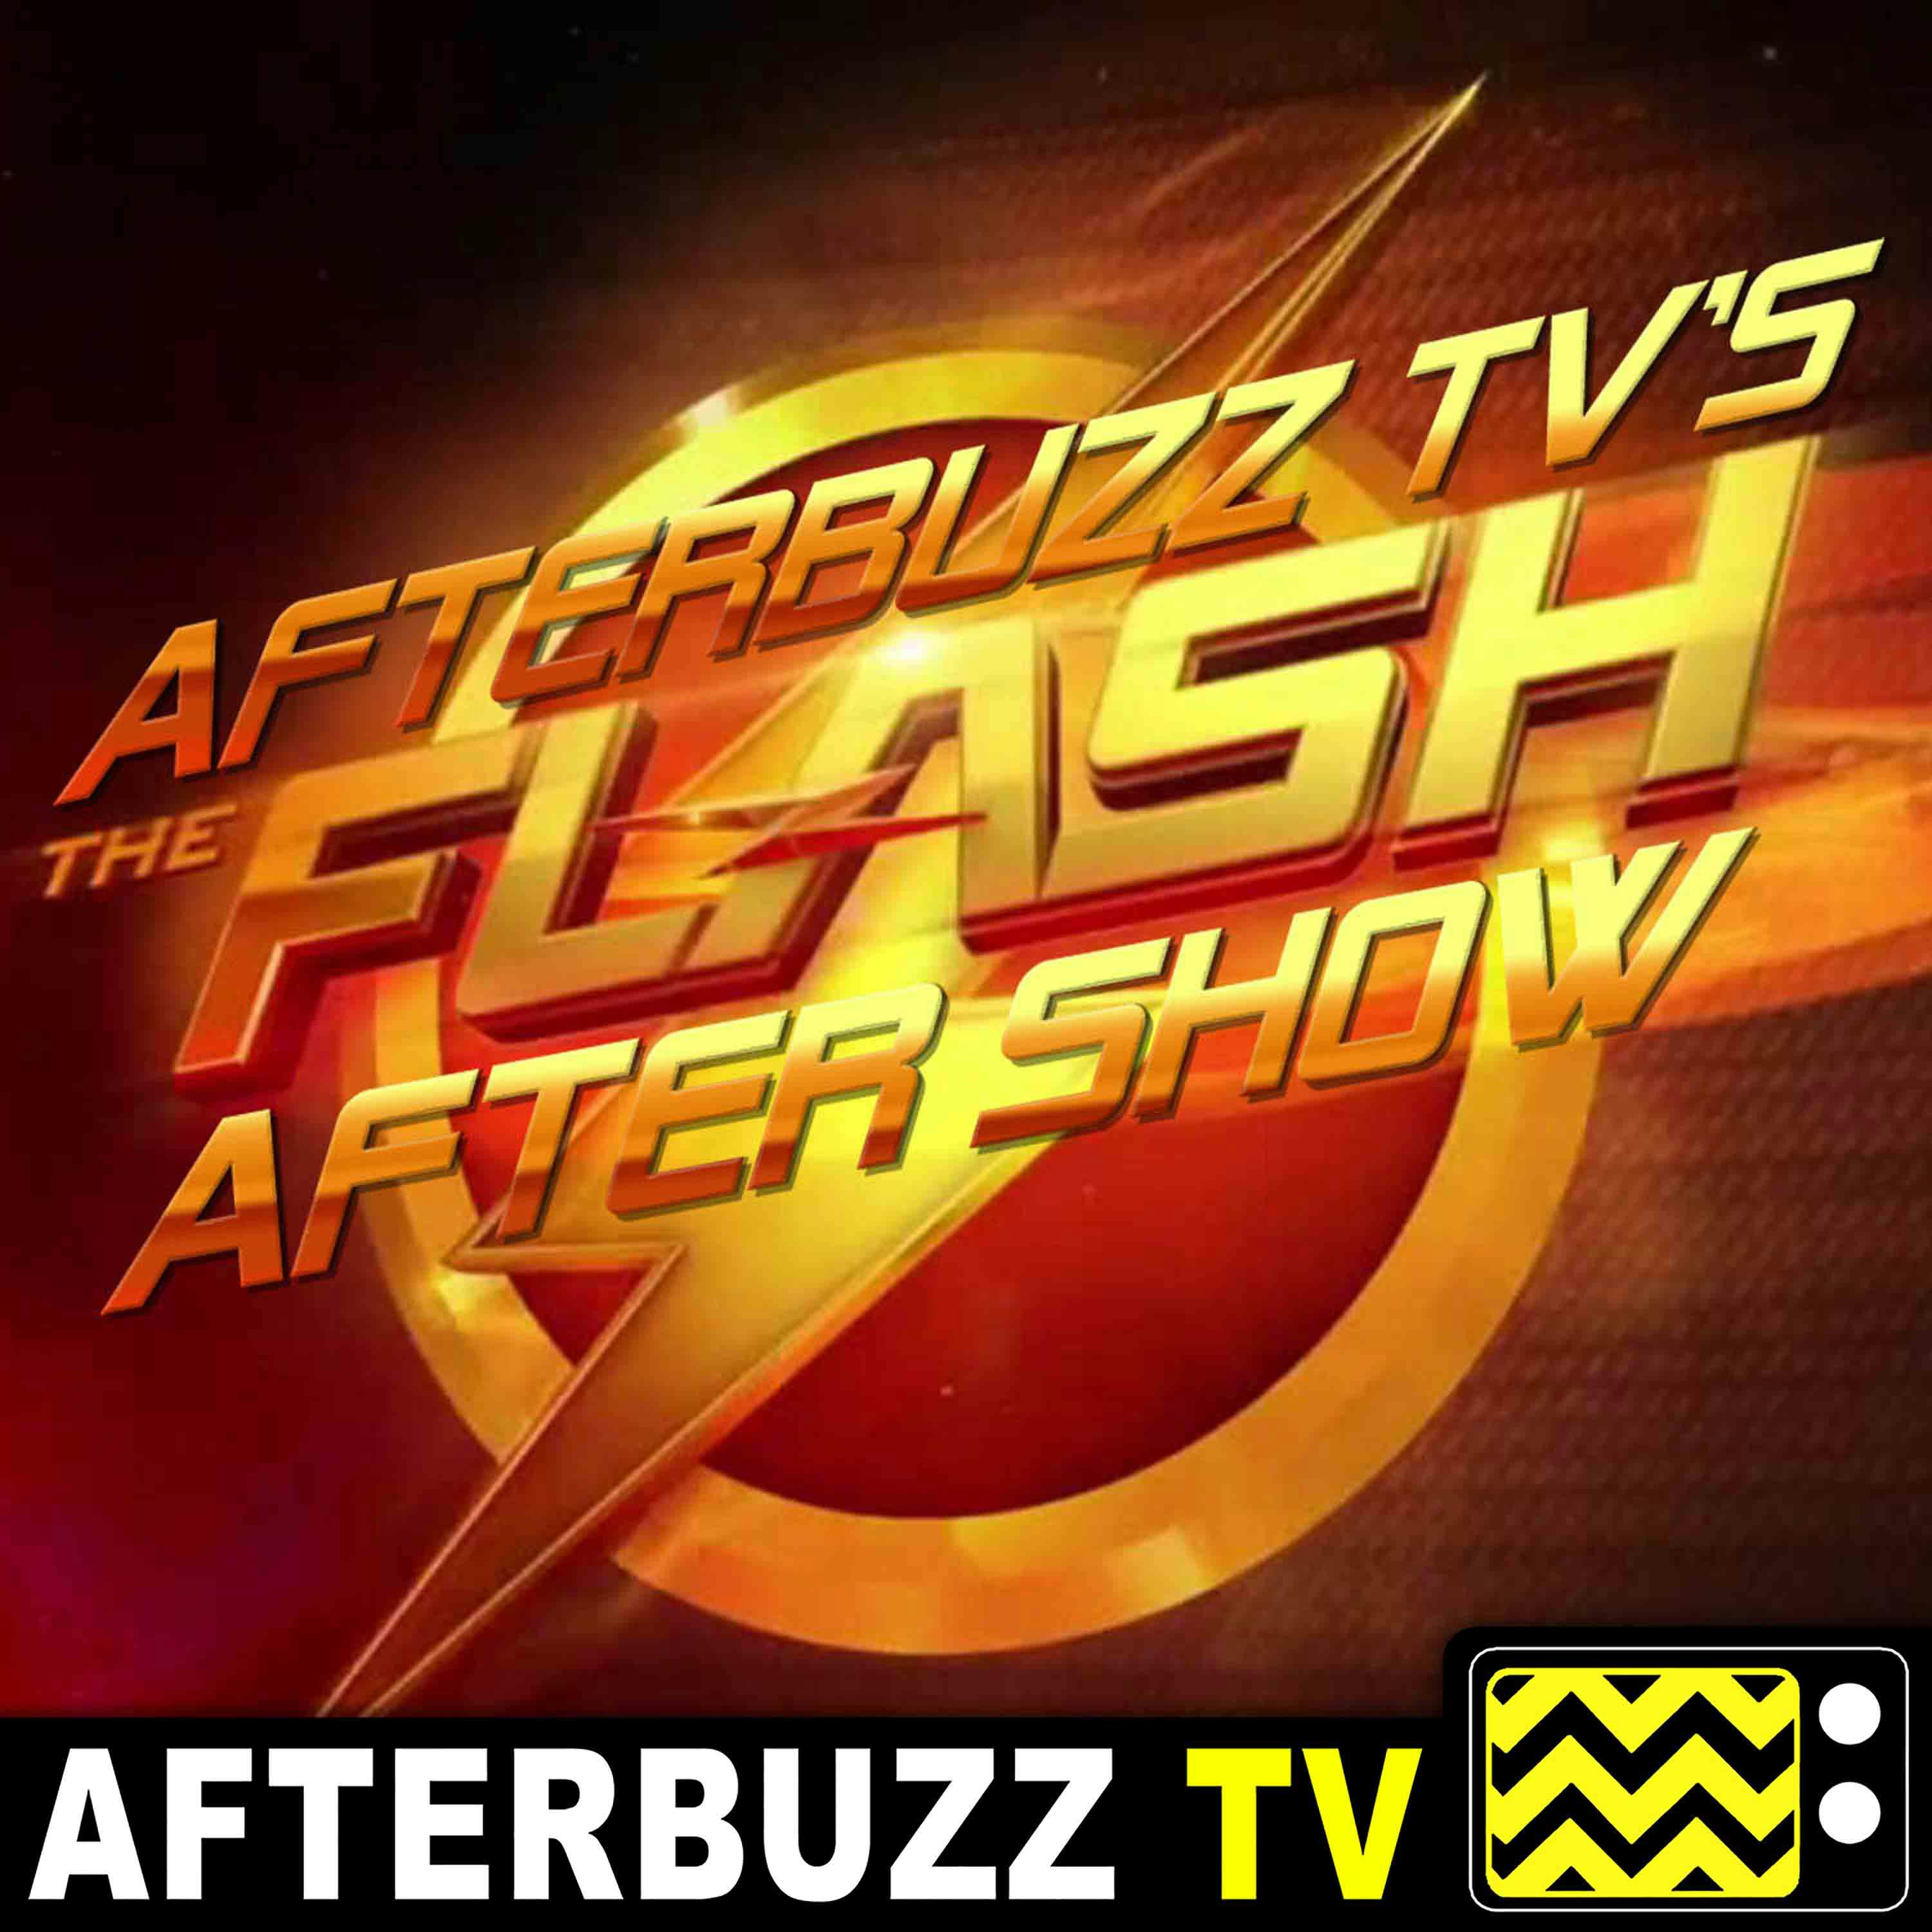 "Crisis on Infinite Earths: Part Three" Season 6 Episode 9 'The Flash' Review